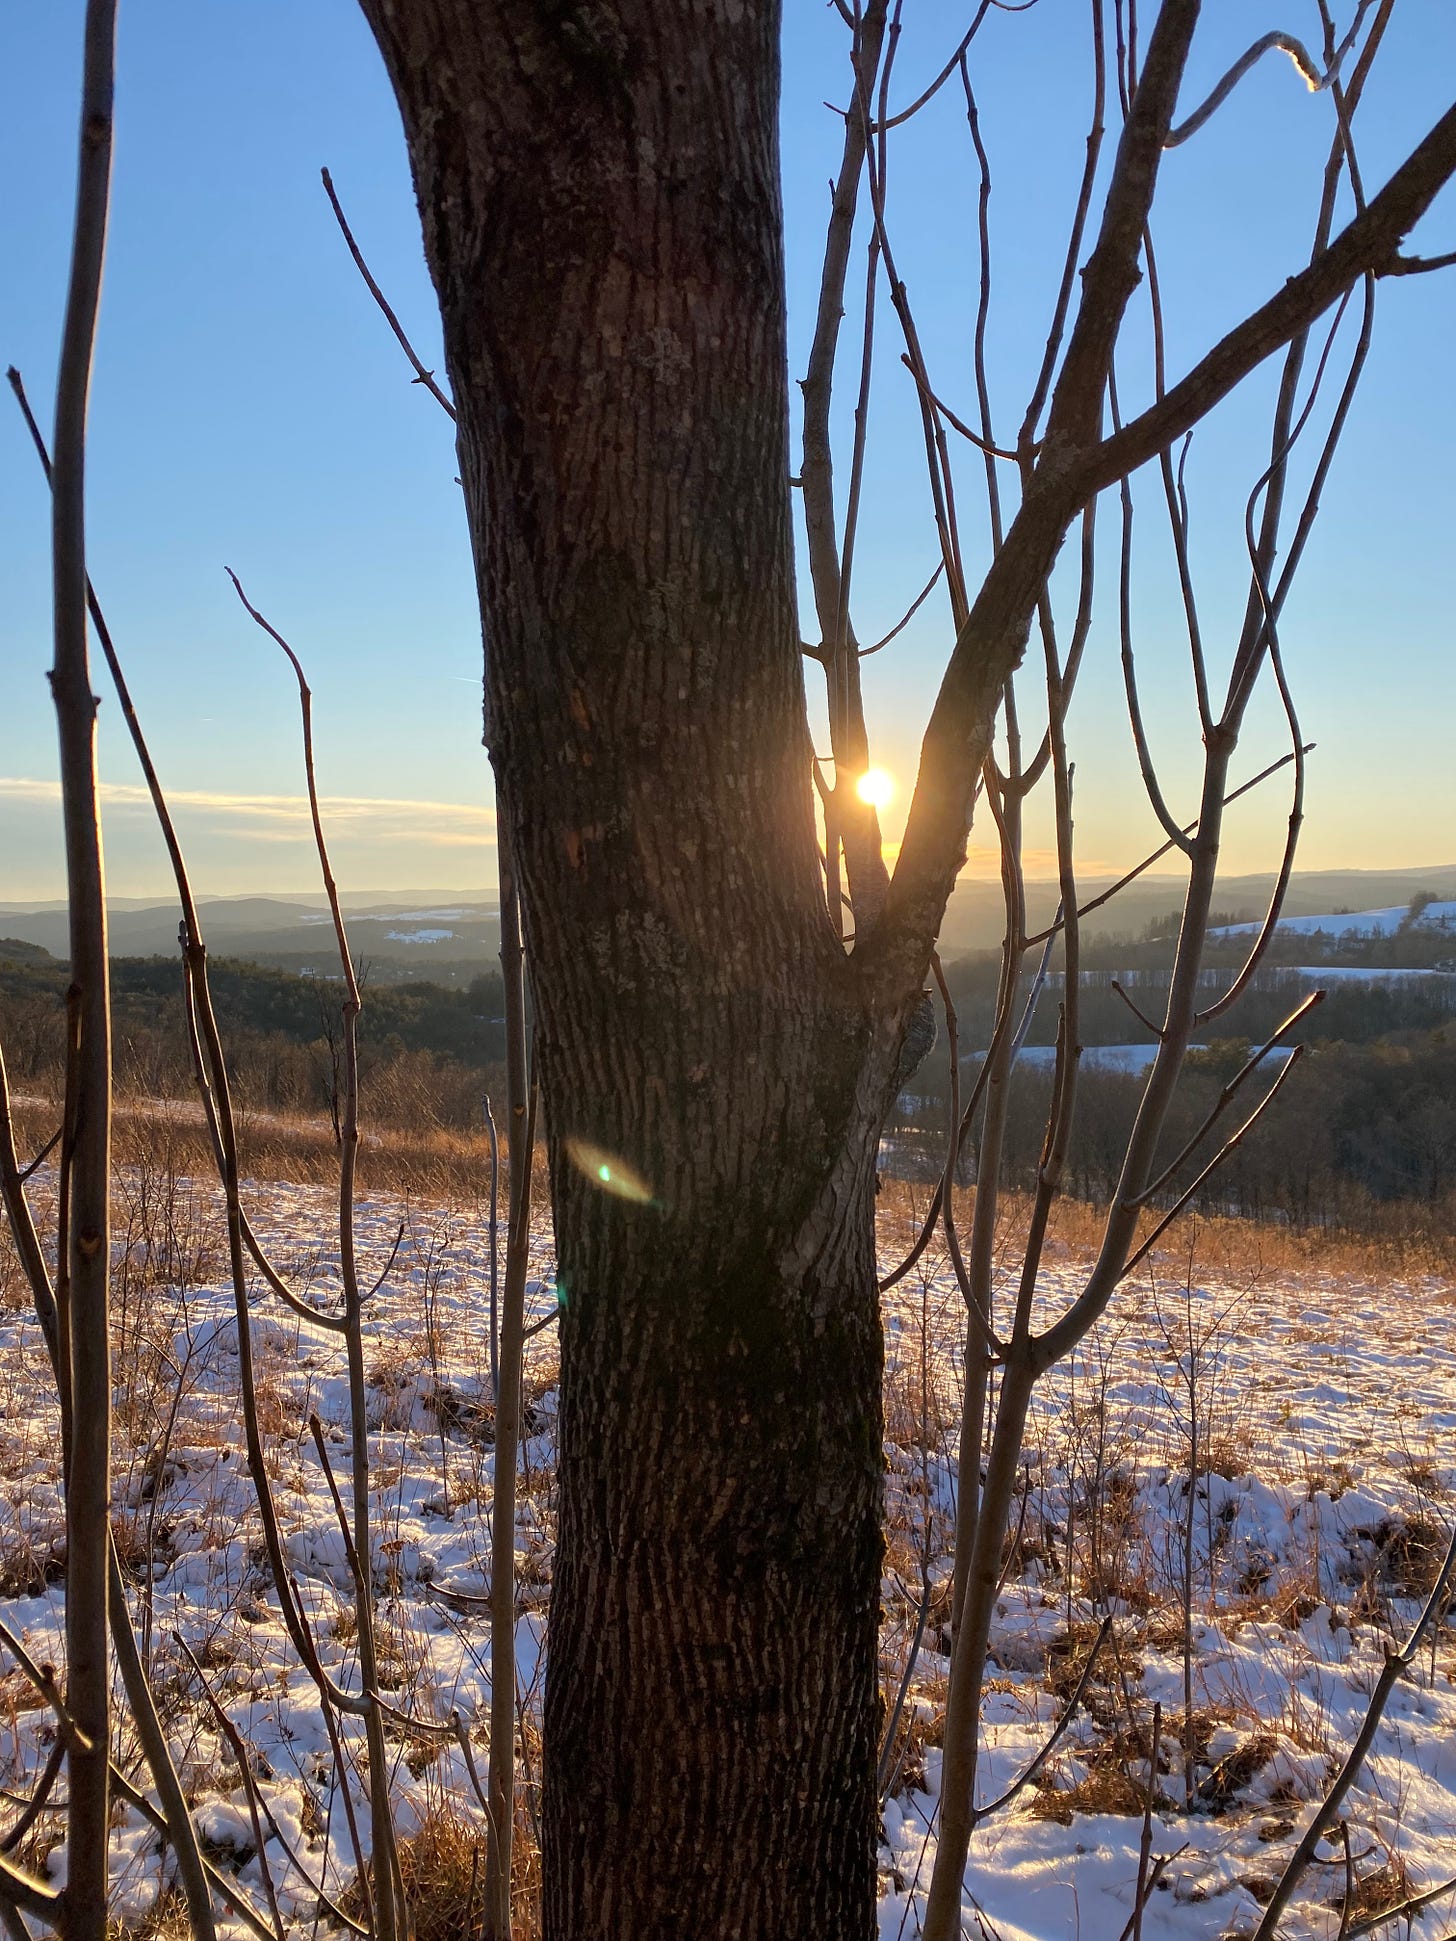 Closeup of a tree trunk on a snowy ridge, with hills and snow-covered fields visible in the distance. The golden sun peeks out from behind the tree, and the sky is a deep blue.